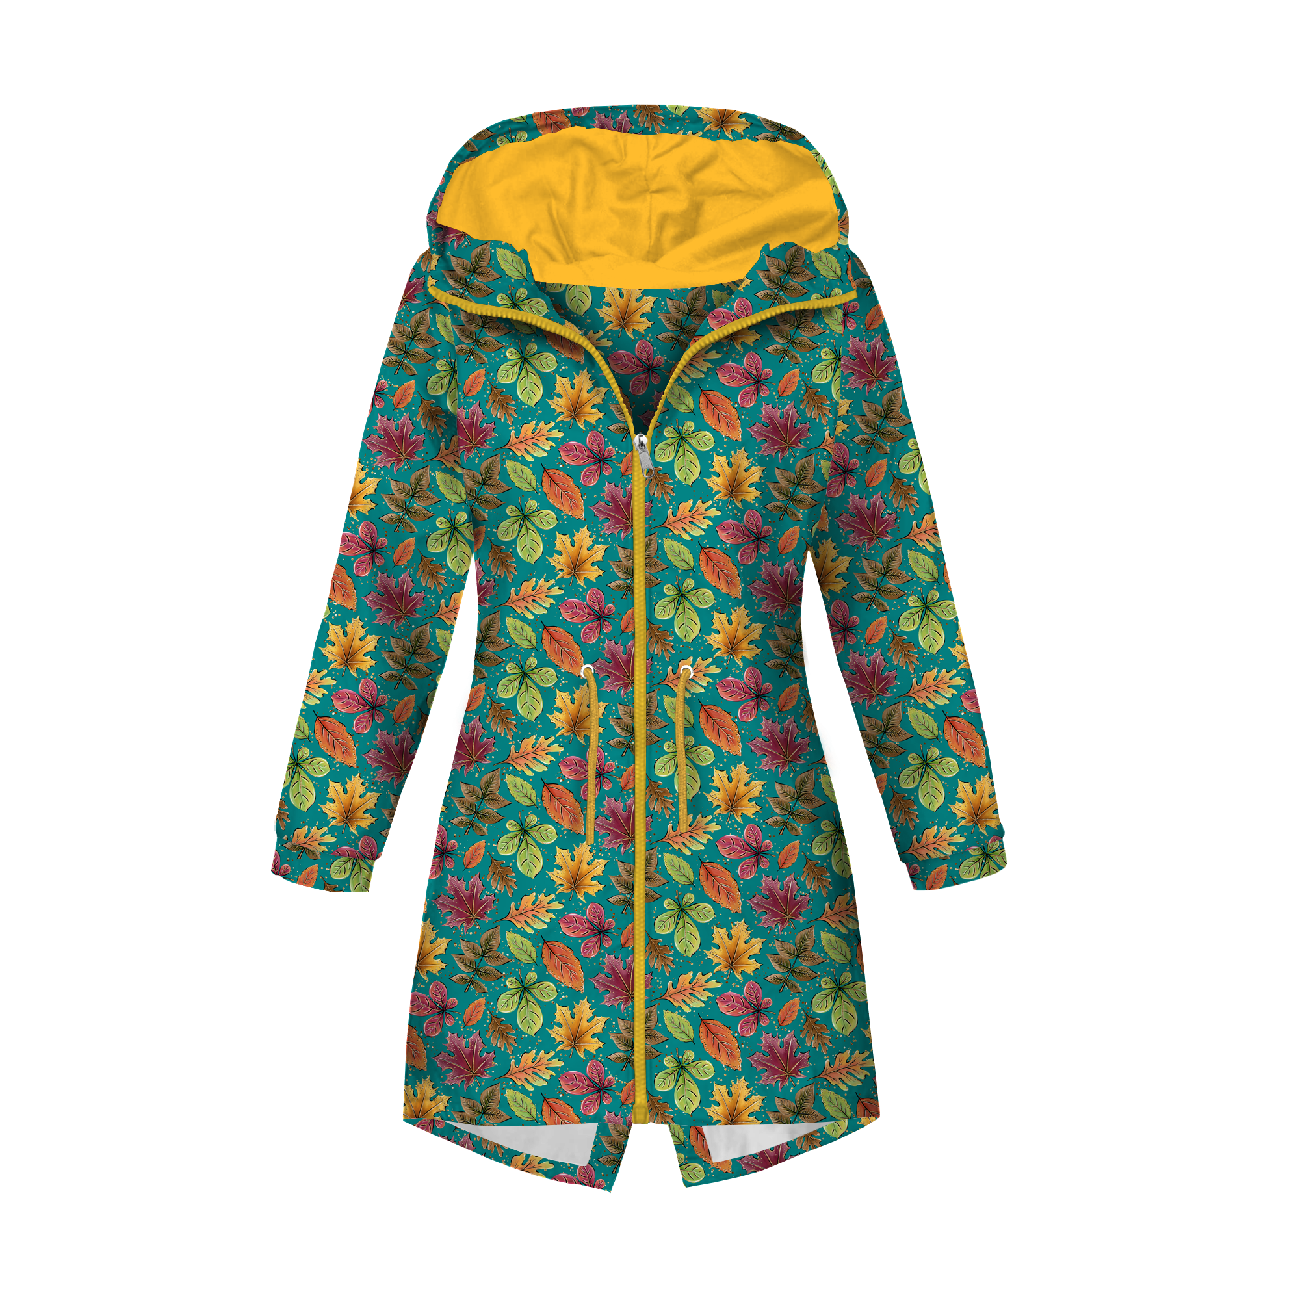 WOMEN'S PARKA (ANNA) - COLORFUL LEAVES MIX / emerald (GLITTER AUTUMN) - softshell